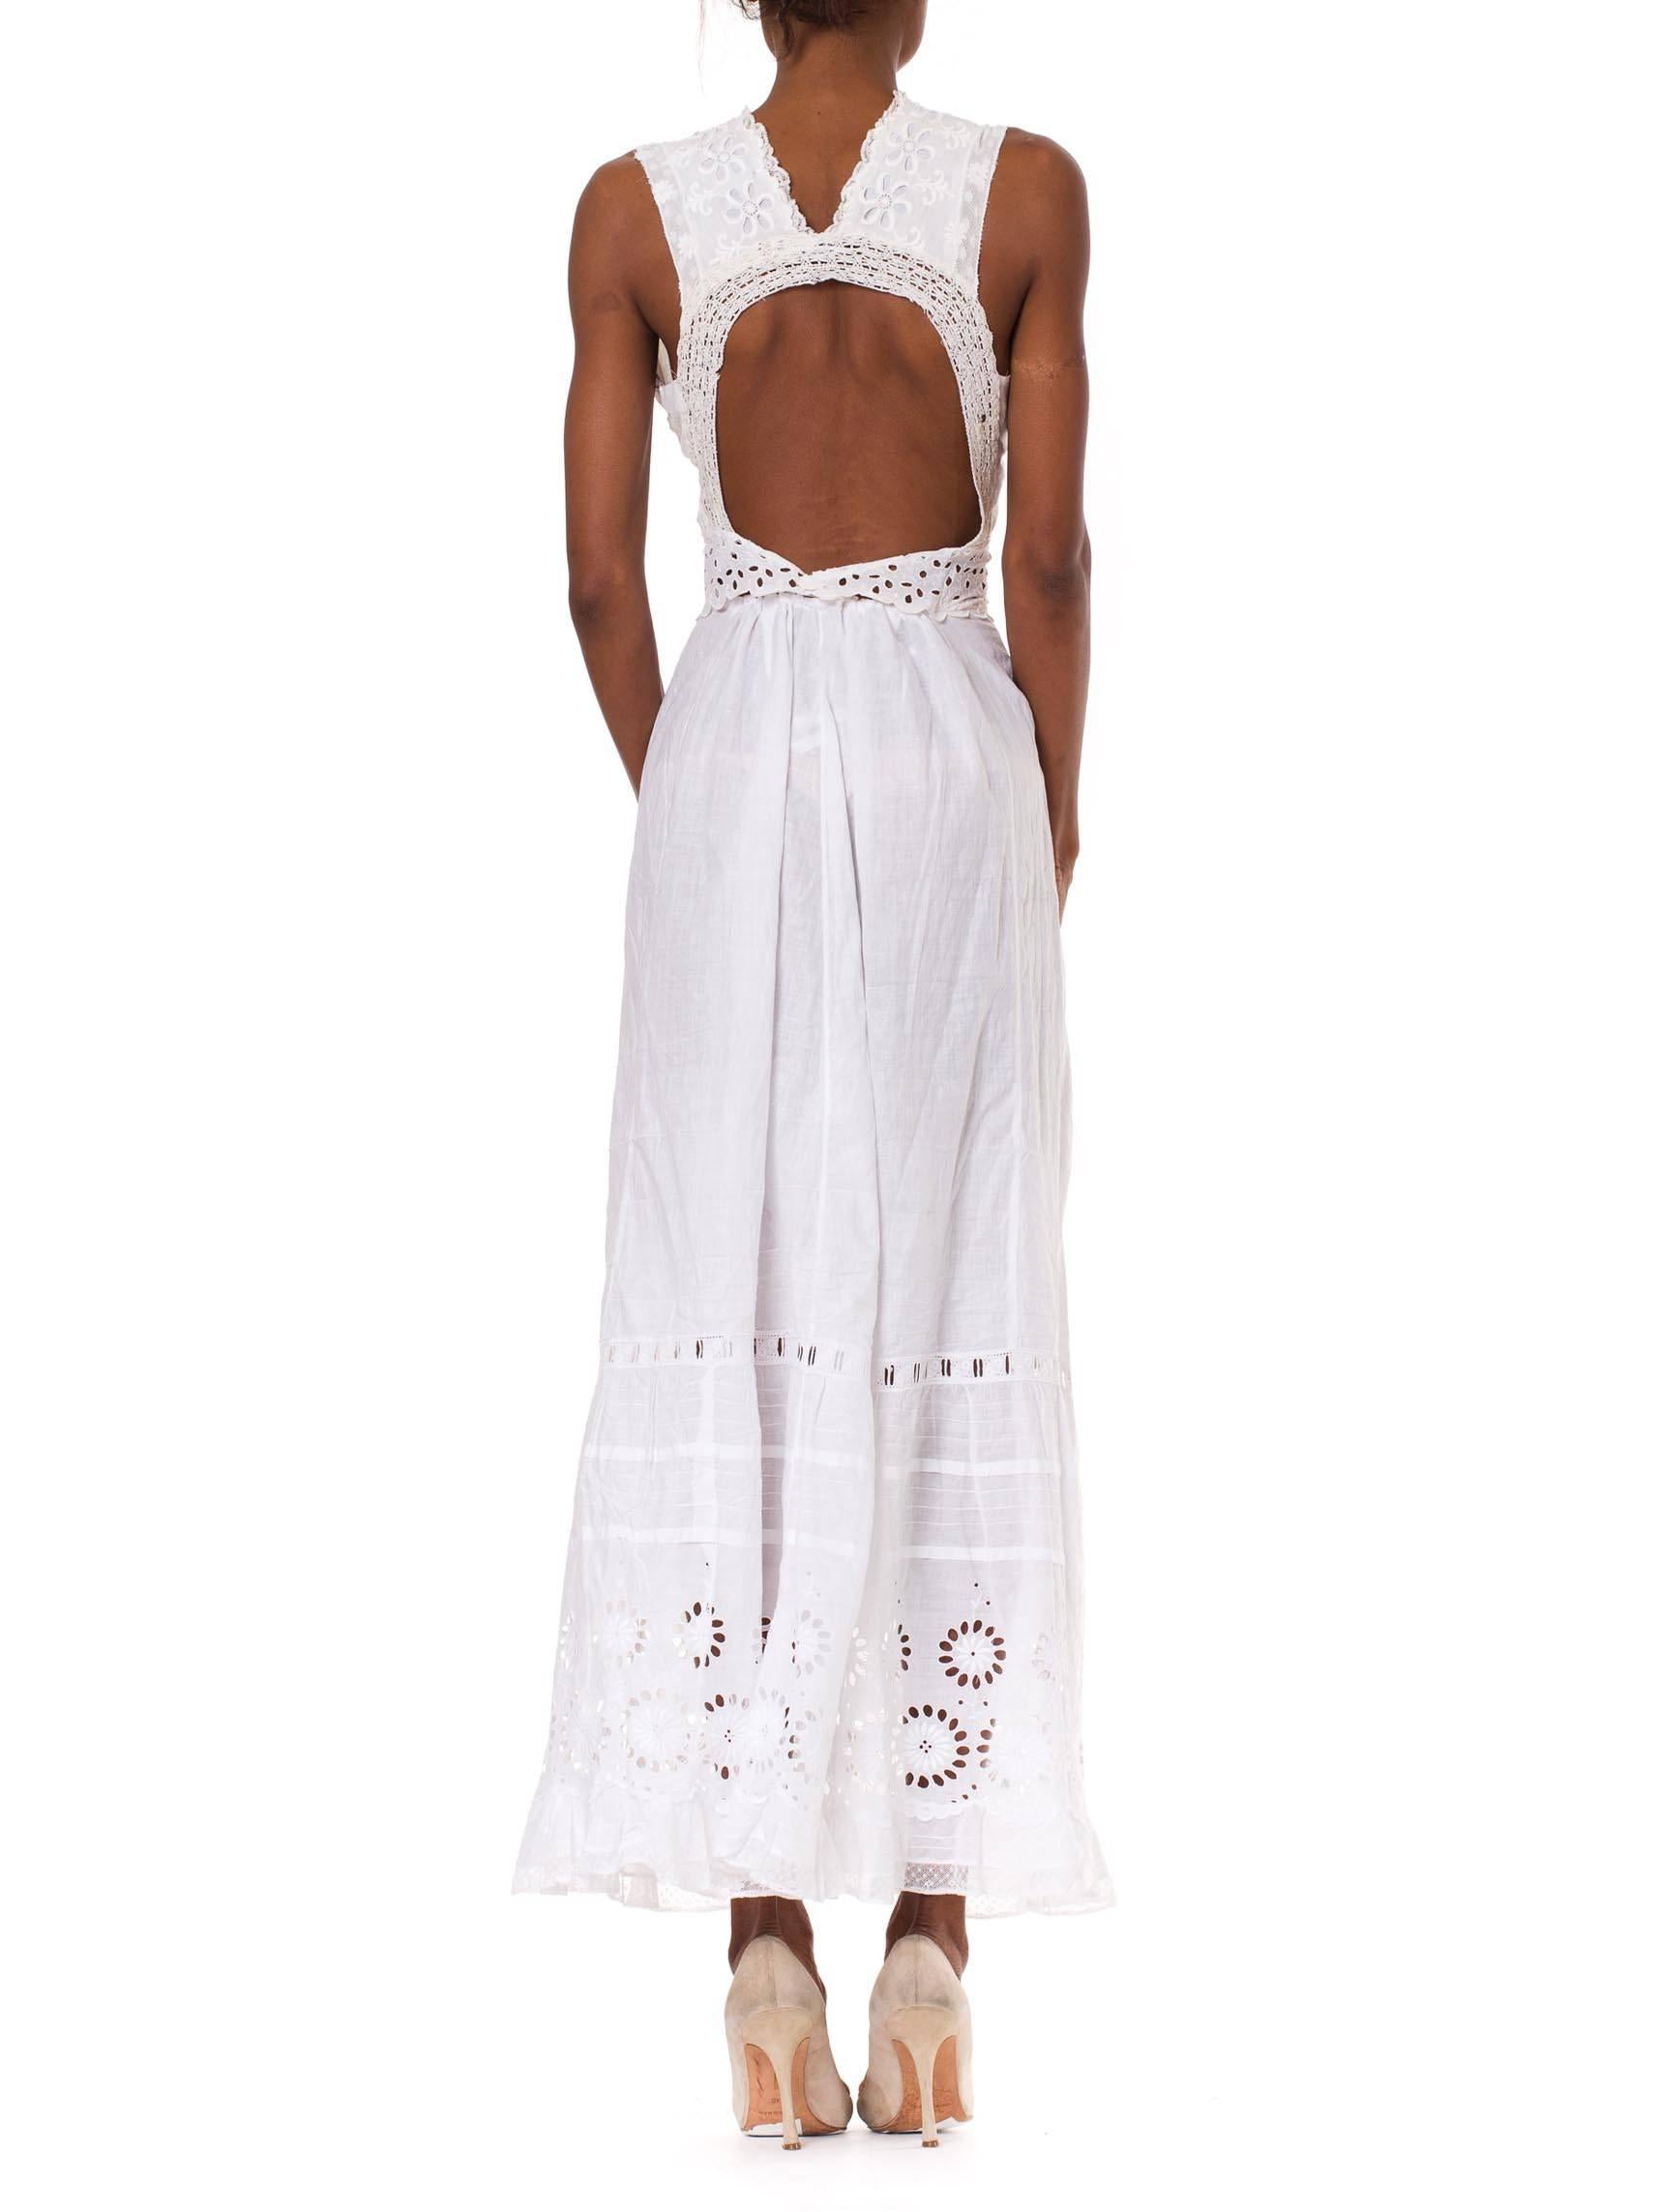 MORPHEW COLLECTION White Organic Cotton Eyelet Lace Maxi Dress Made From Victor In Excellent Condition For Sale In New York, NY